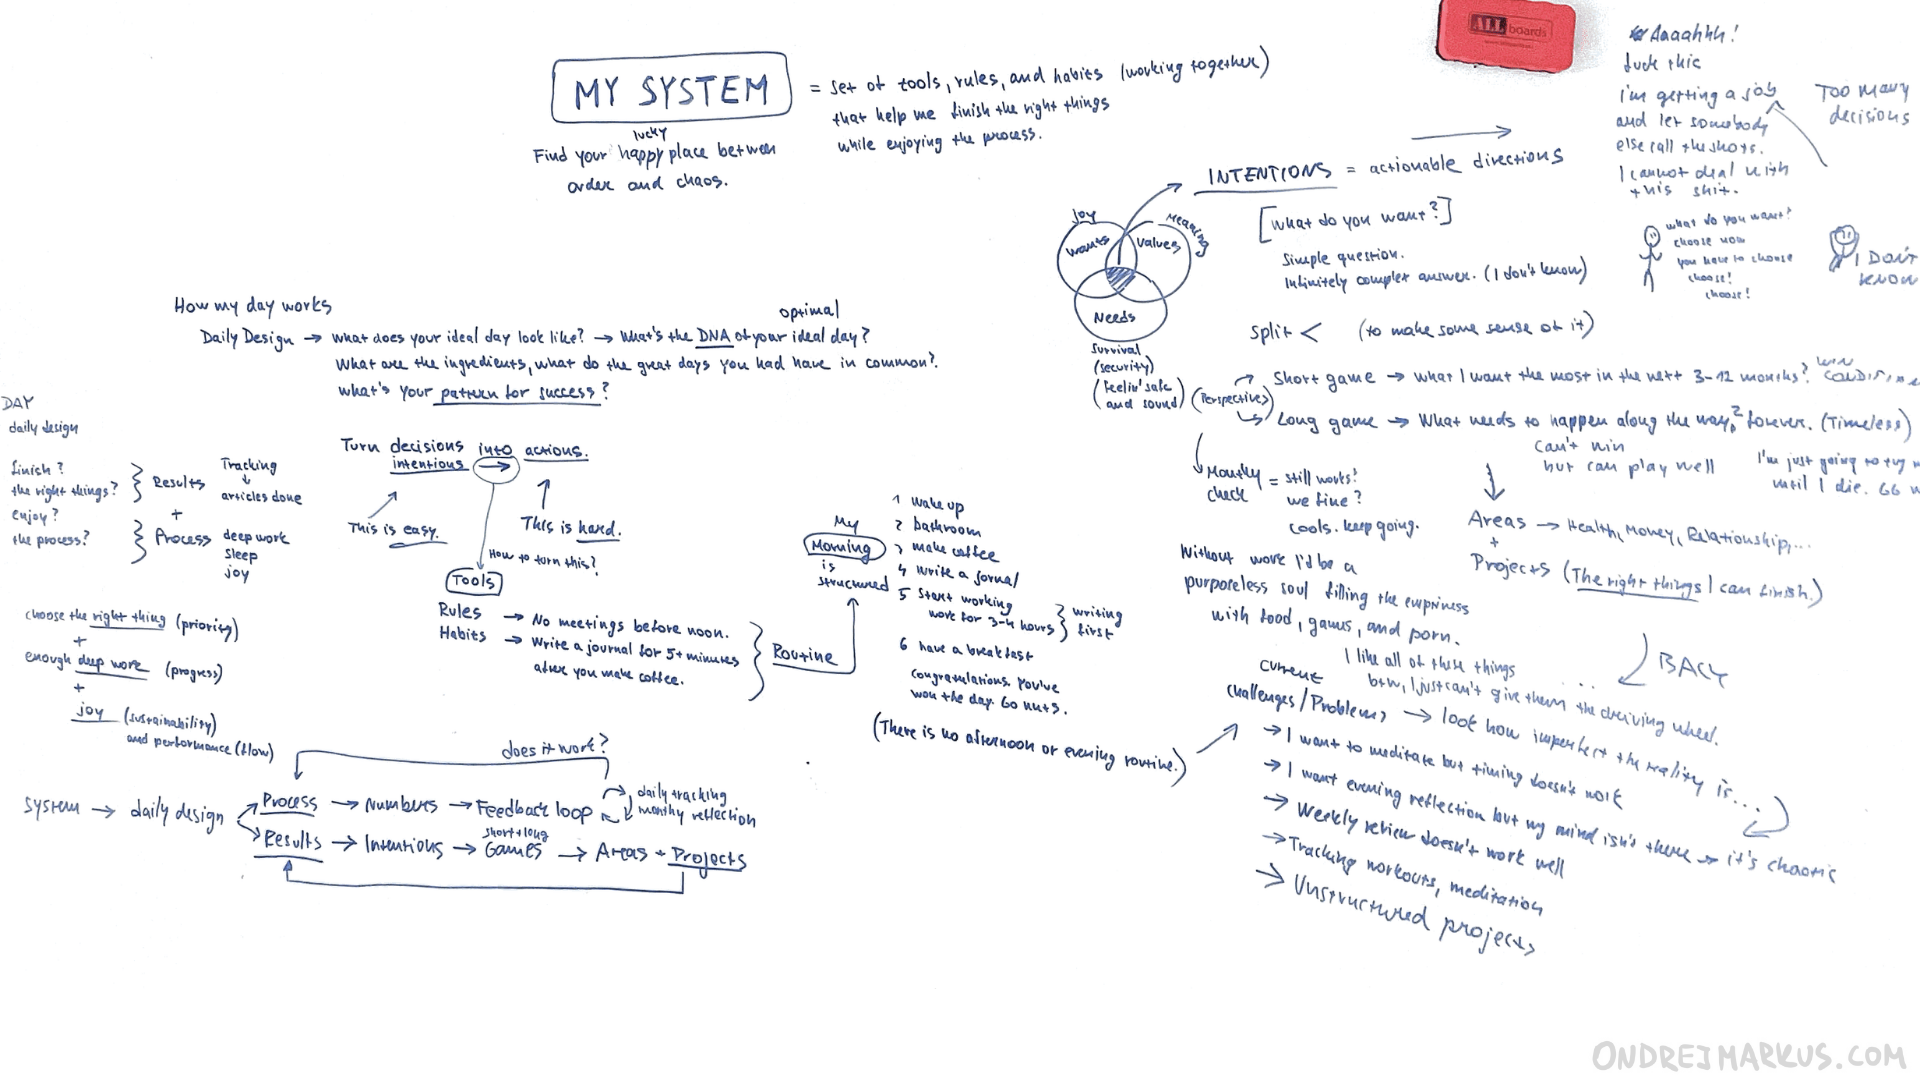 Scan of my whiteboard notes